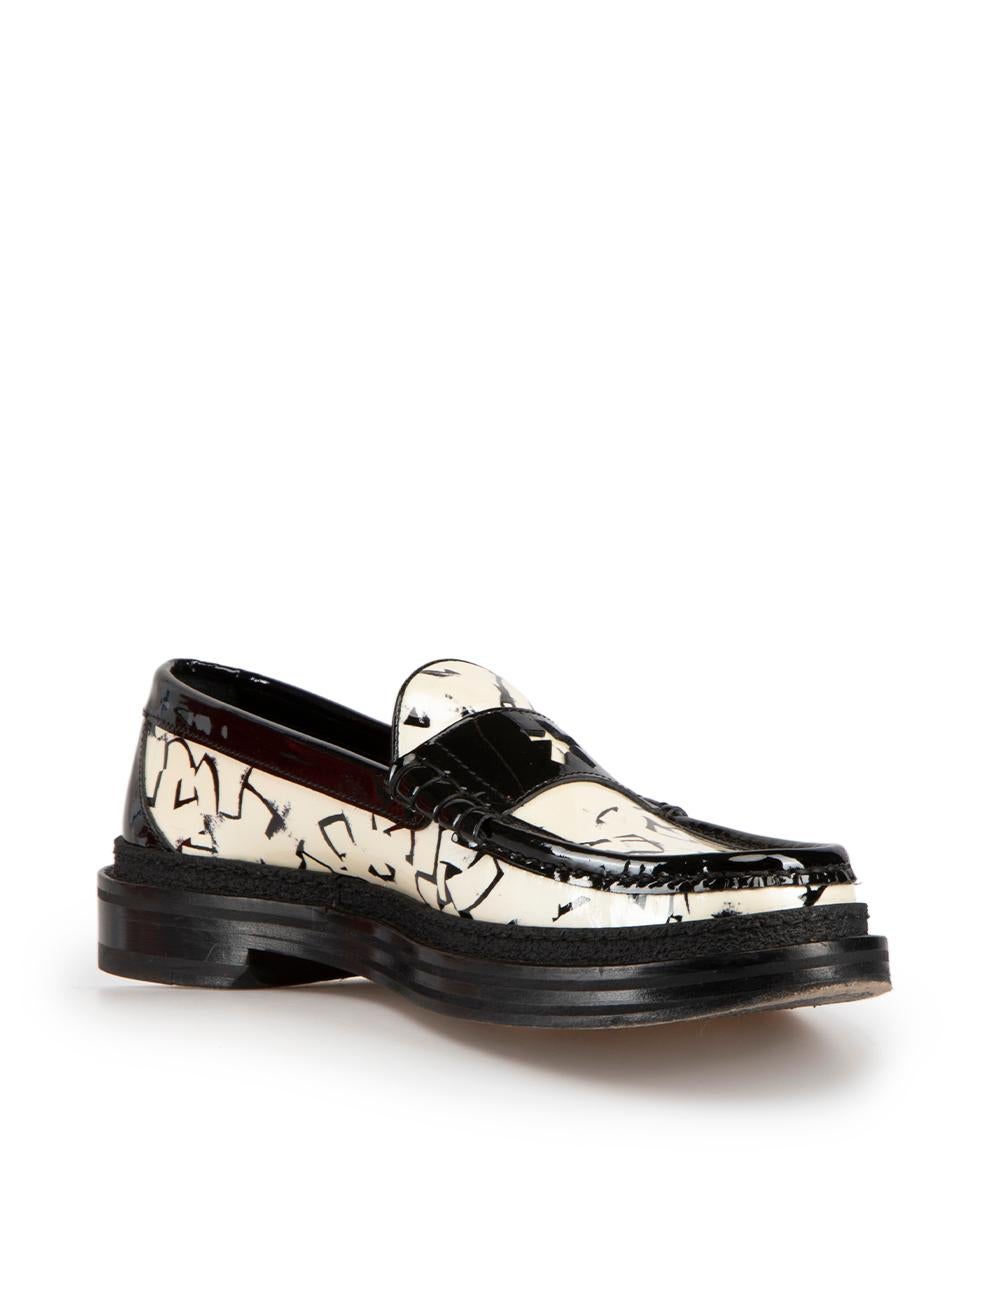 CONDITION is Very good. Hardly any visible wear to loafers is evident on this used Jimmy Choo x Eric Haze designer resale item.

Details
Jimmy Choo x Eric Haze
Black and white
Patent leather
Loafers
Round toe
Abstract pattern
Made in